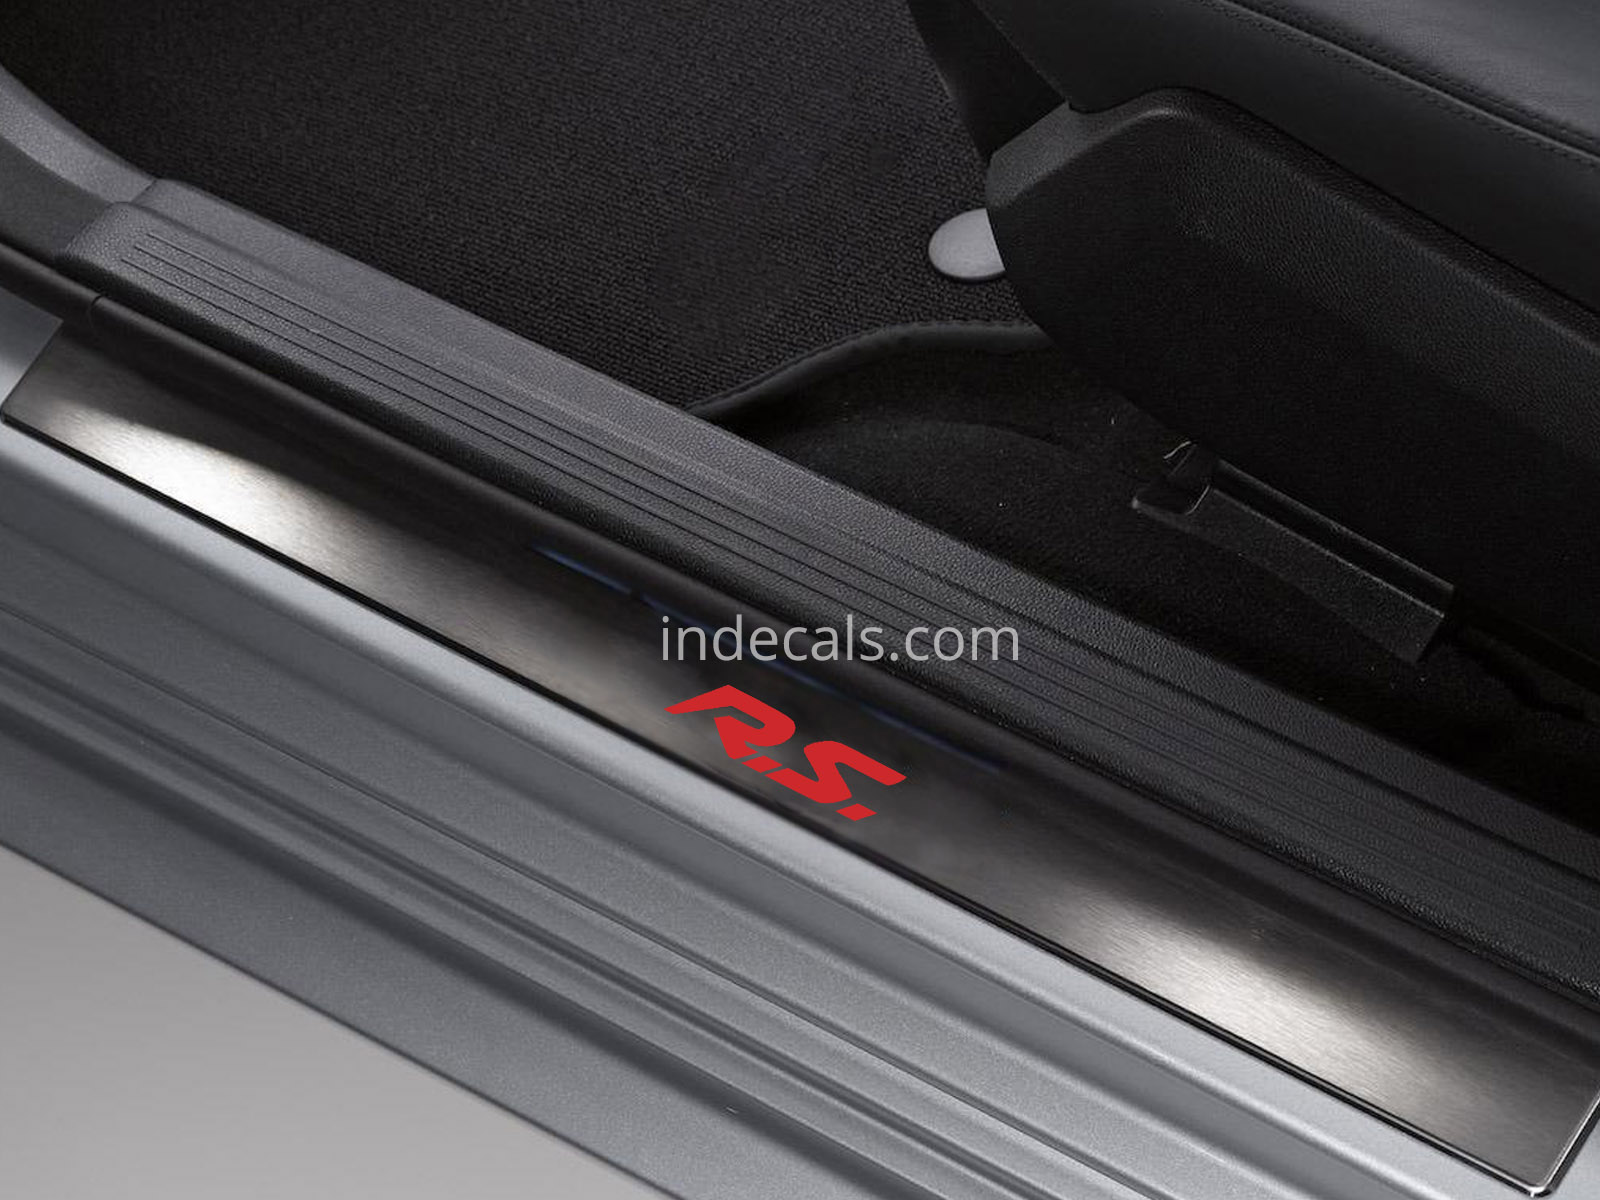 6 x Renault RS Stickers for Door Sills - Red